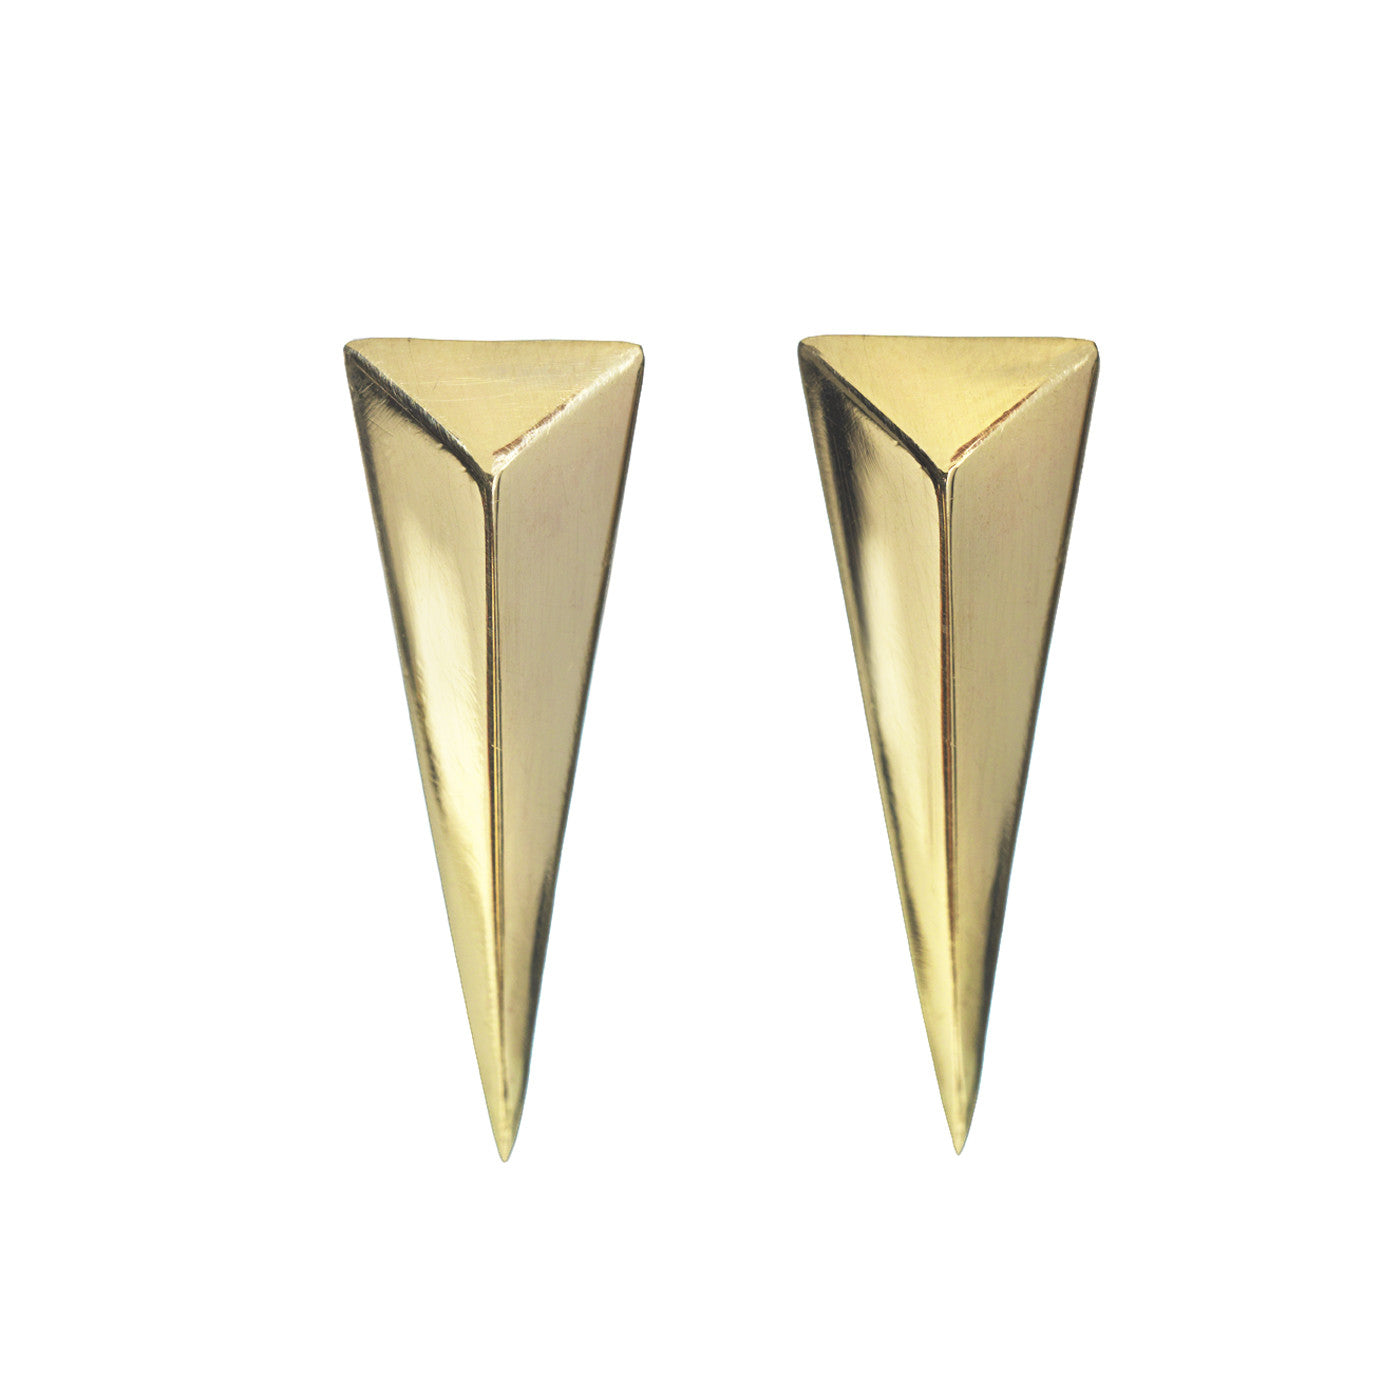 Solid Pyramid Earrings